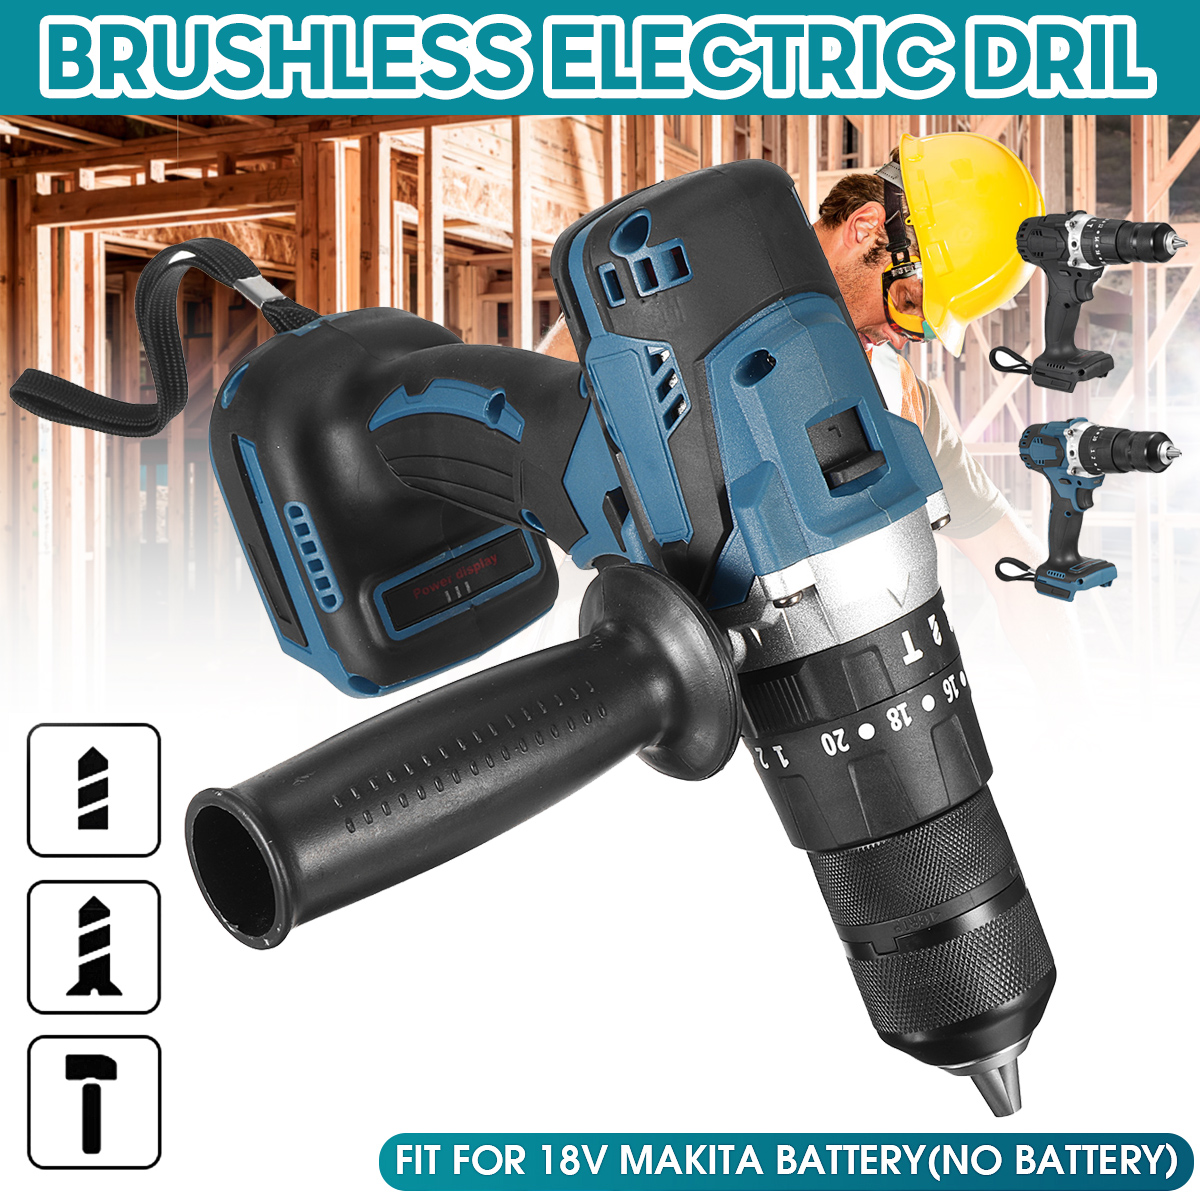 13mm-Chuck-Self-Lock-3-In-1-Brushless-Electric-Drill-20-Torque-2-Speed-Rechargeable-Power-Drills-Dri-1880980-1